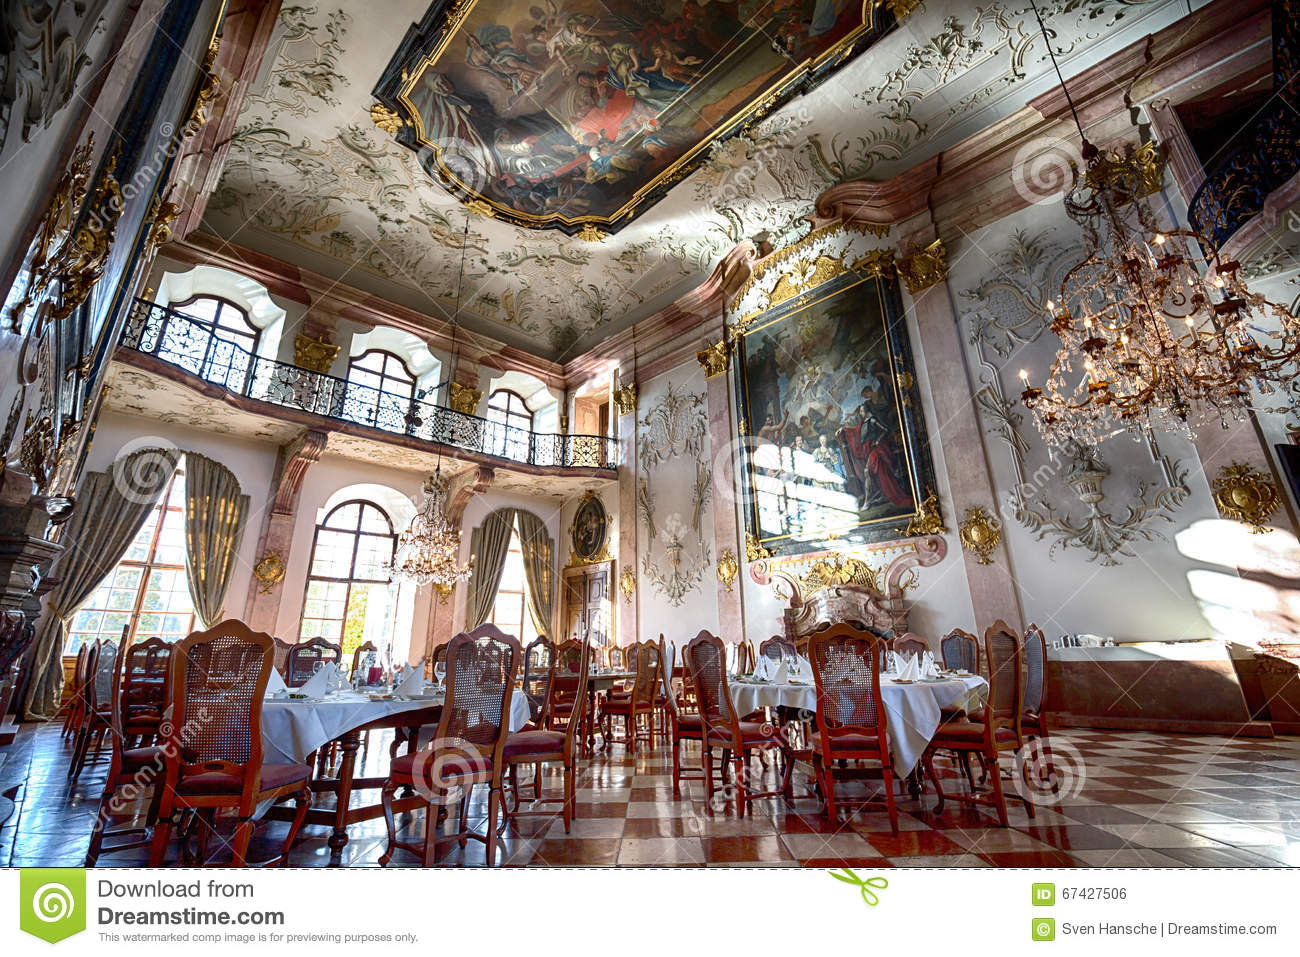 Mid-Evil Dinner Room</a><br> by <a href='/profile/Bling-King/'>Bling King</a>